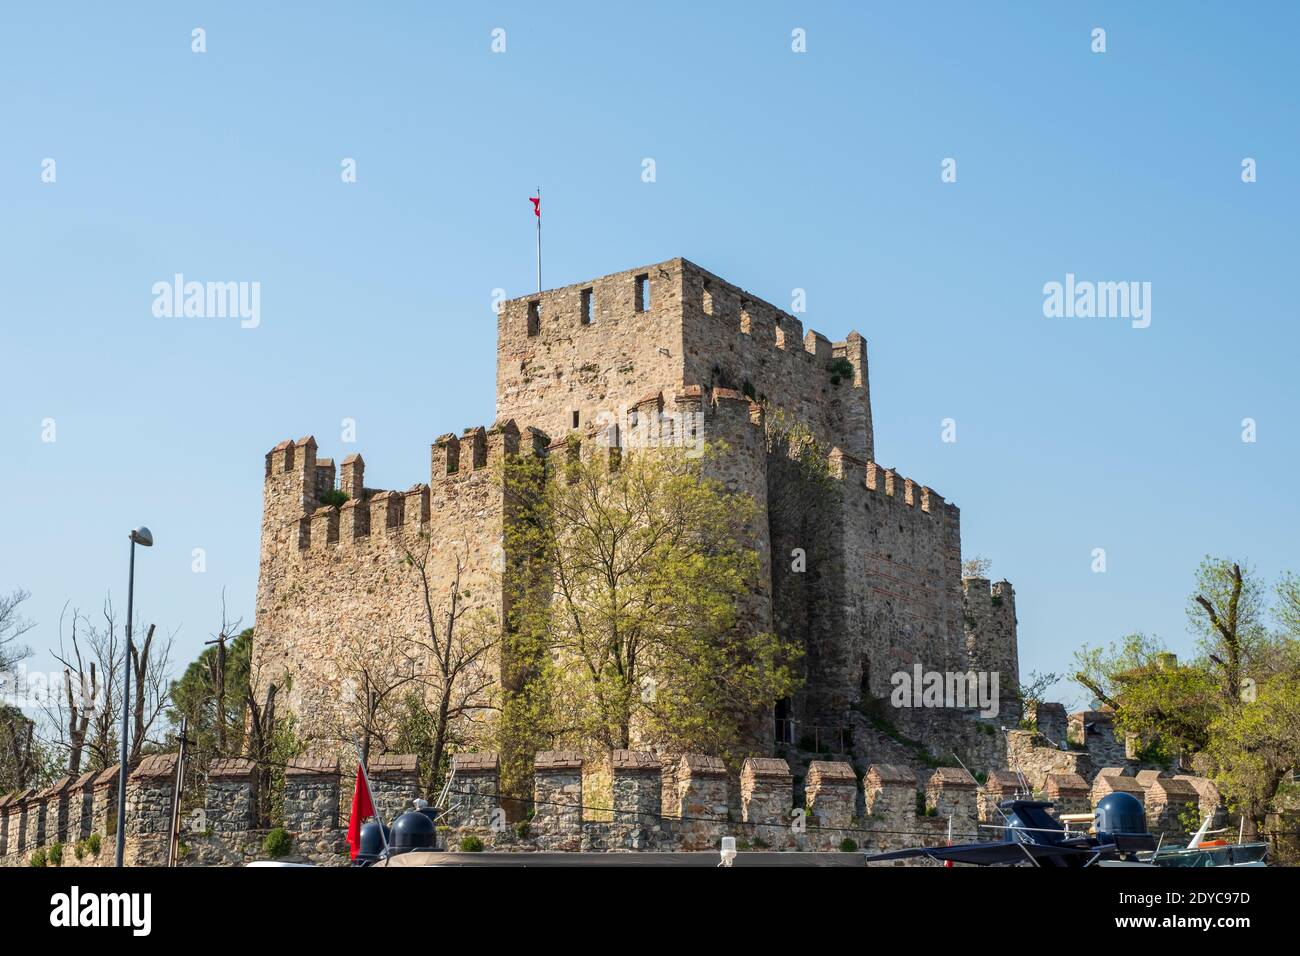 ISTANBUL, TURKEY - APRIL 10, 2018:Anatolian castle (Anadolu Hisari) in Istanbul.It is a fortress located in Anatolian (Asian) side of the Bosporus Stock Photo